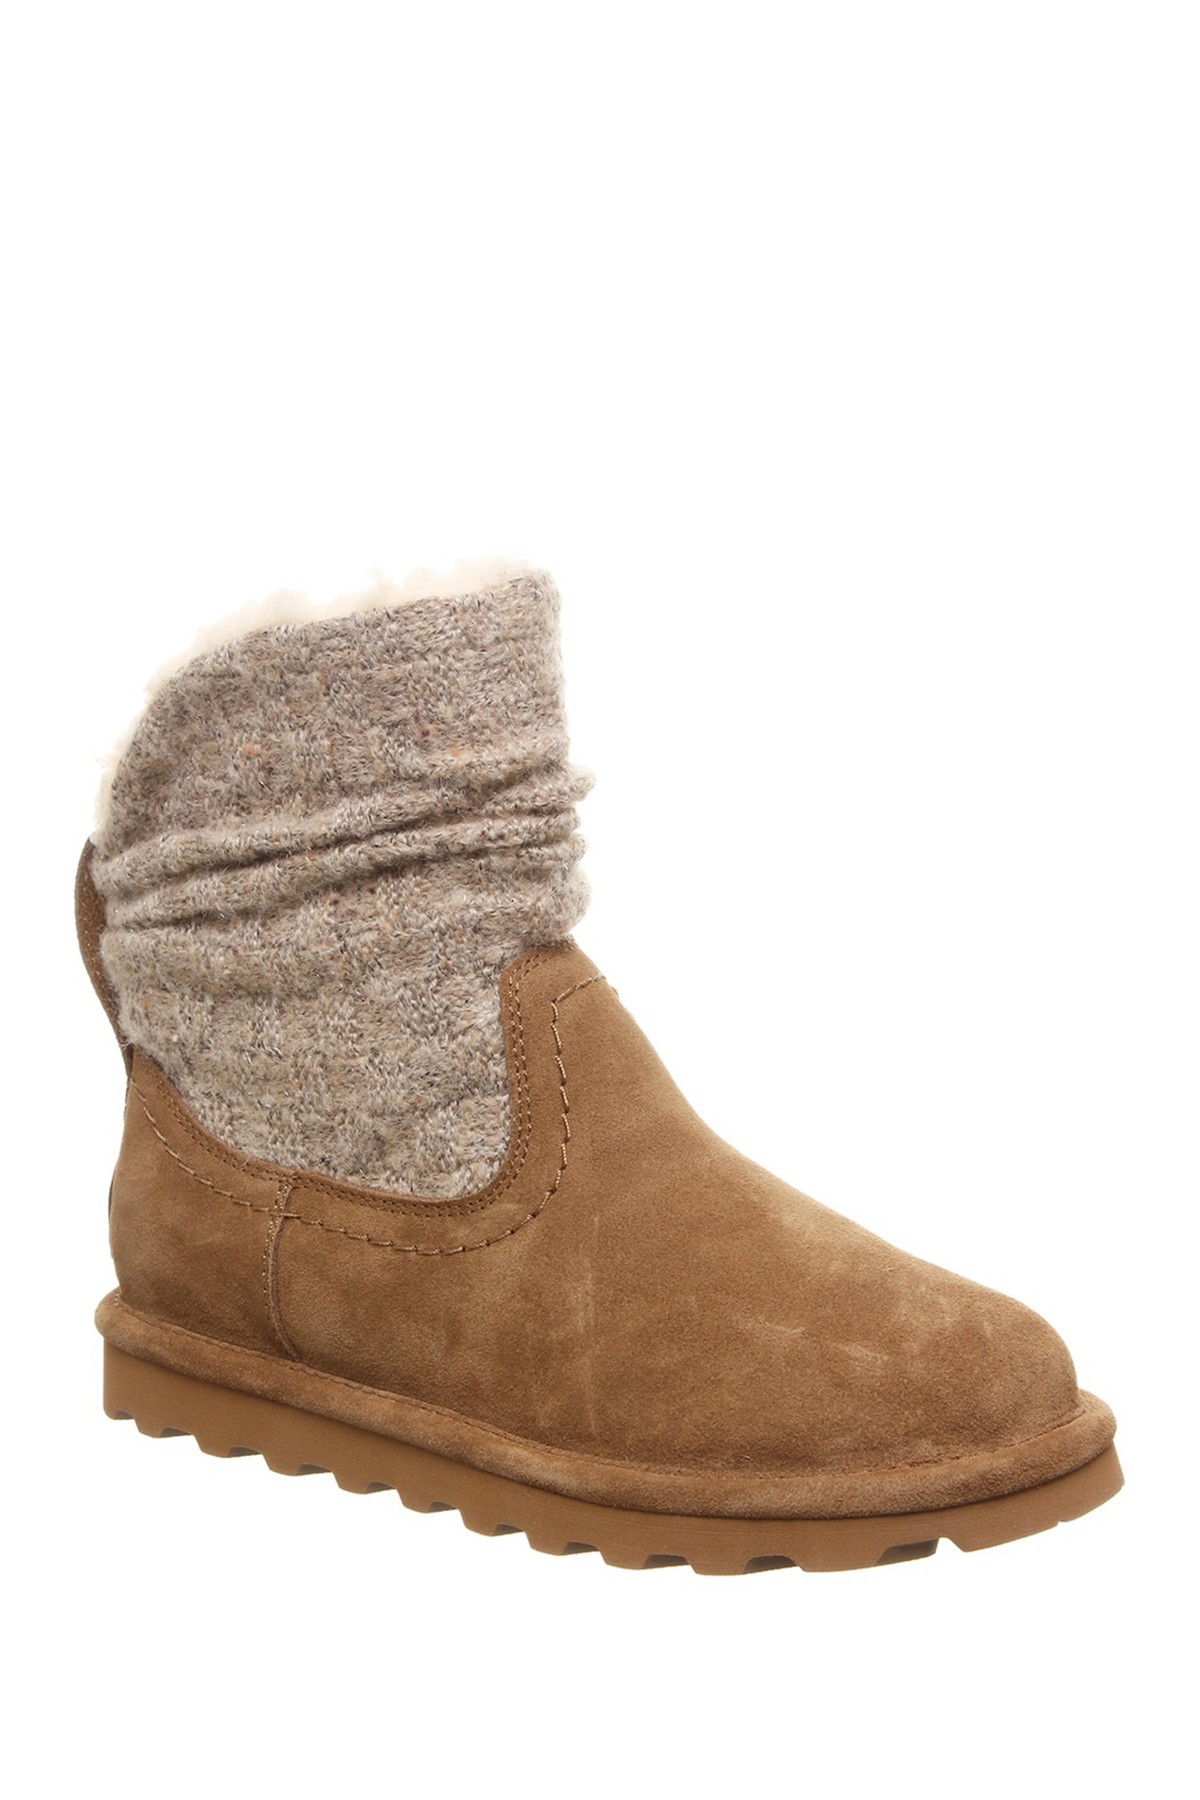 uggs that look like timbs